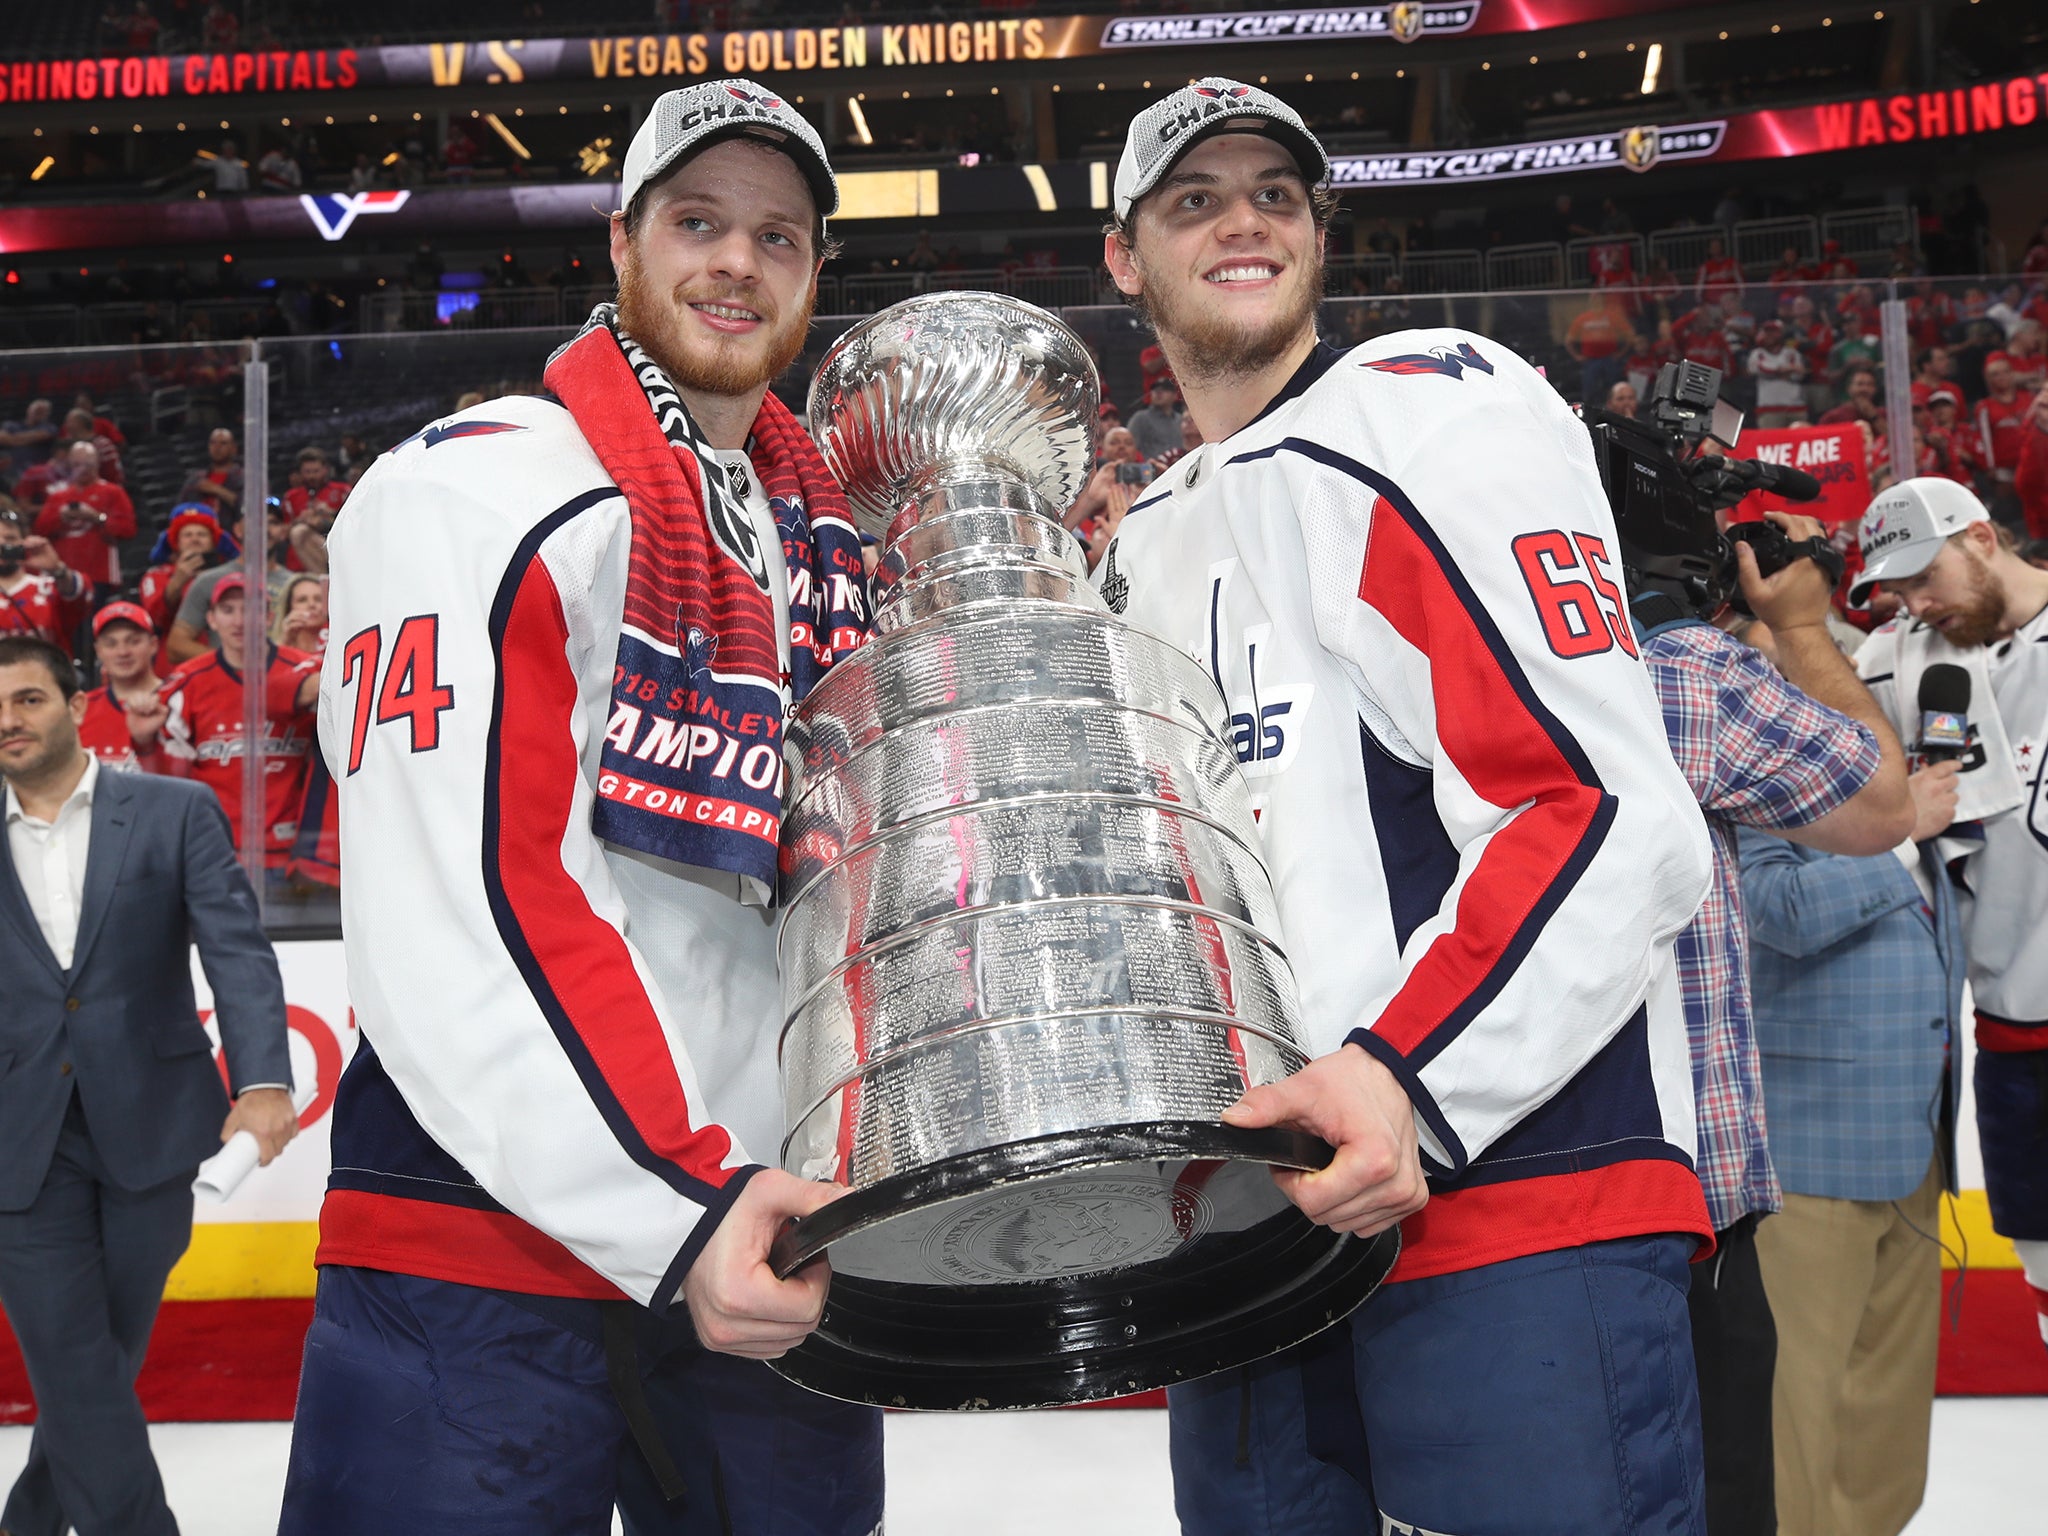 The Capitals won the Stanley Cup with a 4-3 win on Thursday